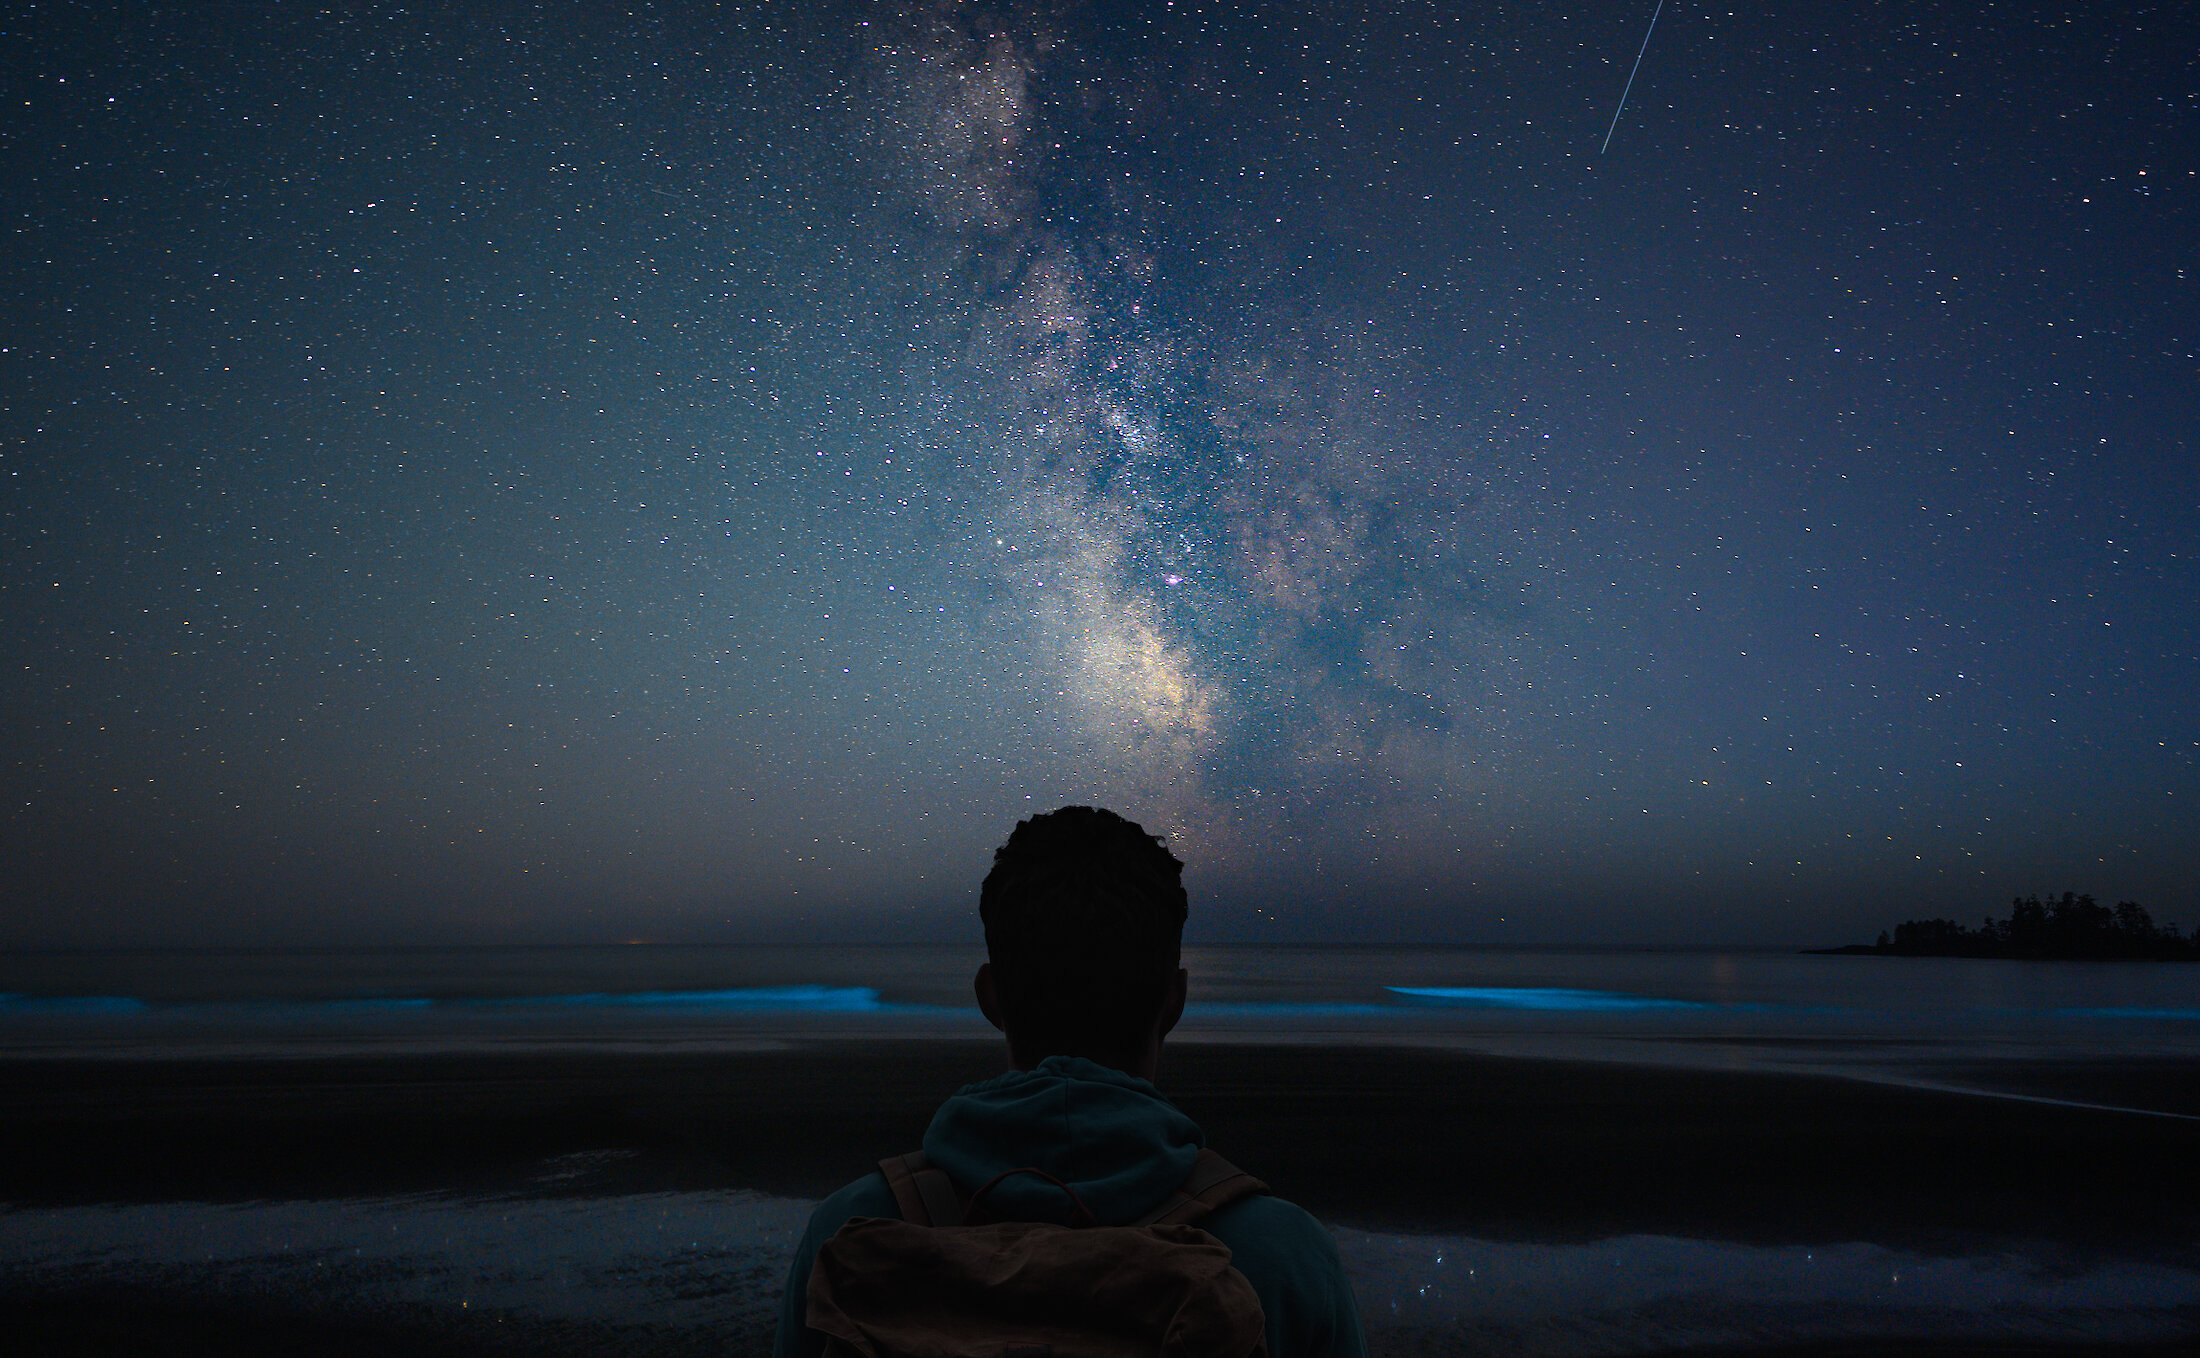 Back of the head of a person looking at the Milky Way